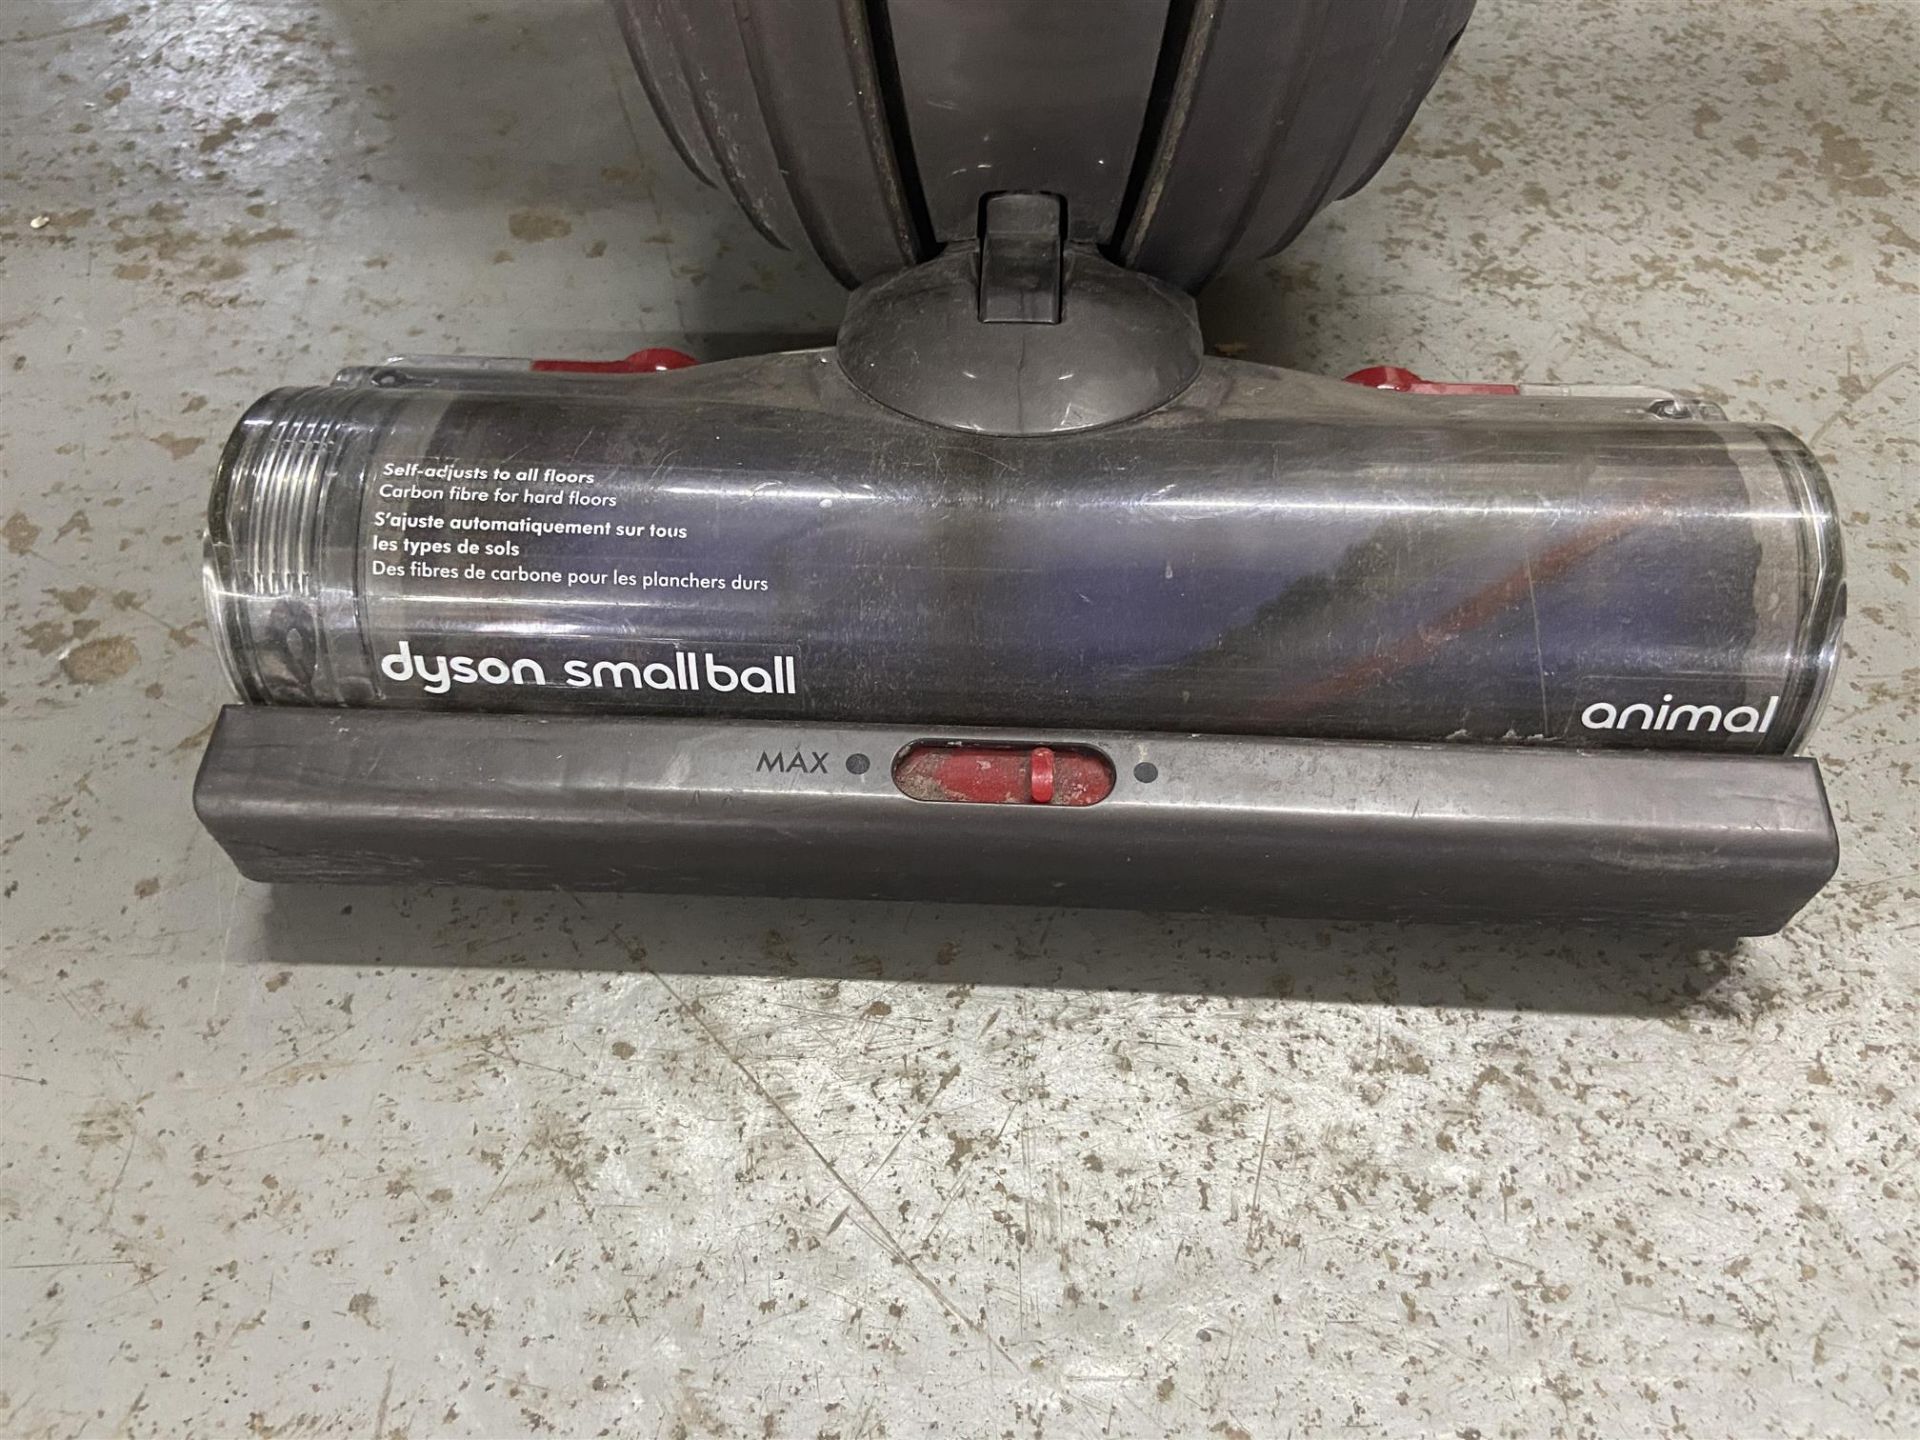 Dyson Smallball animal Vaccume cleaner - Image 2 of 2